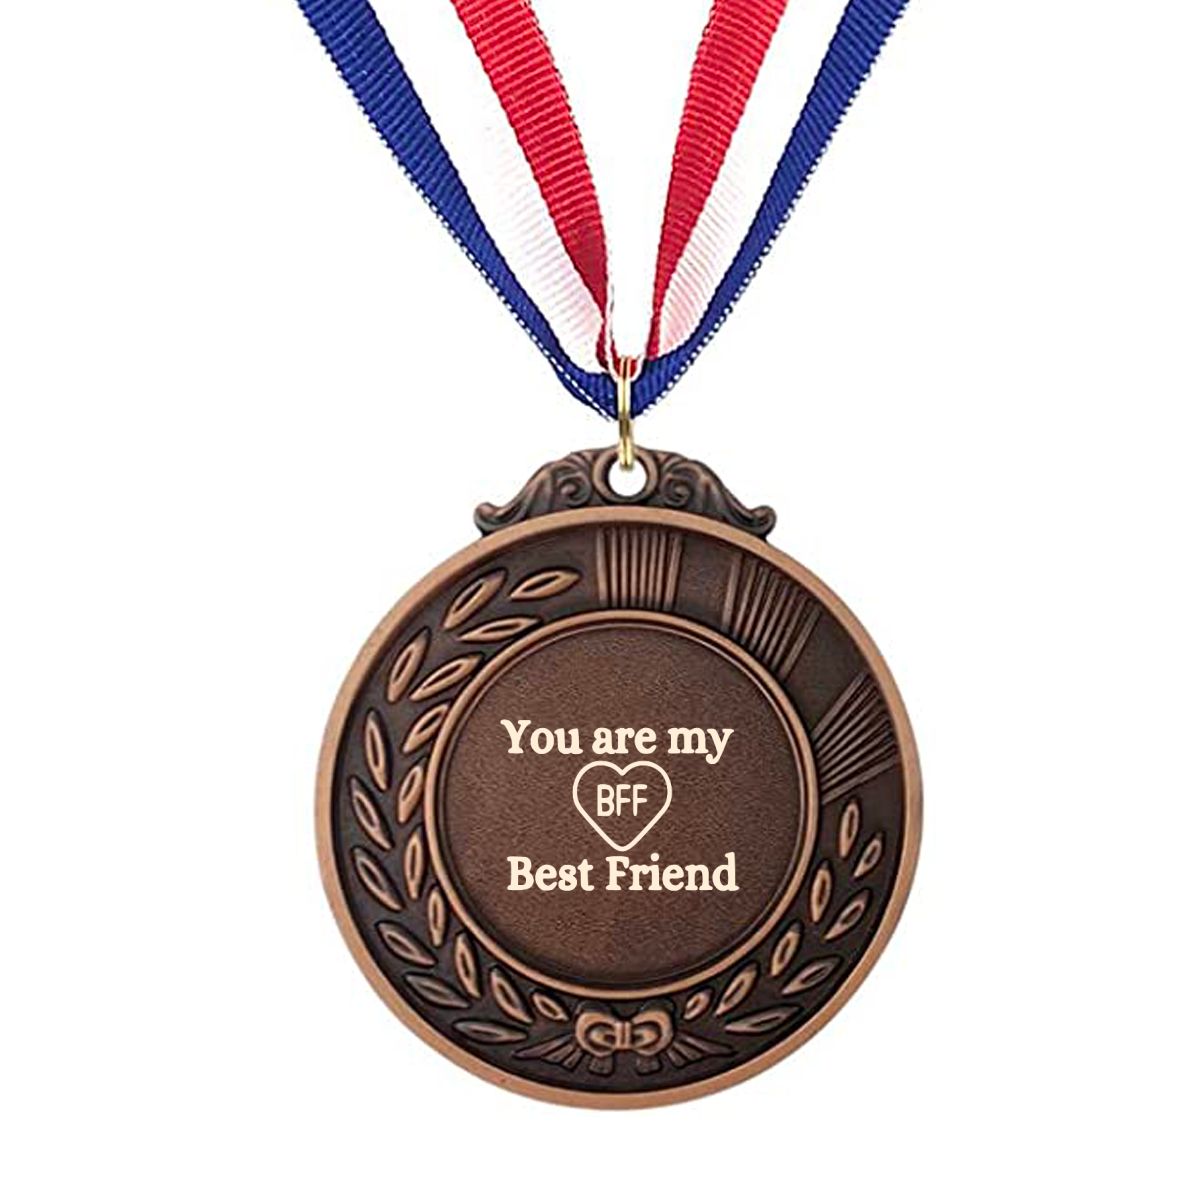 you are my best friend medaille 🥇🥈🥉